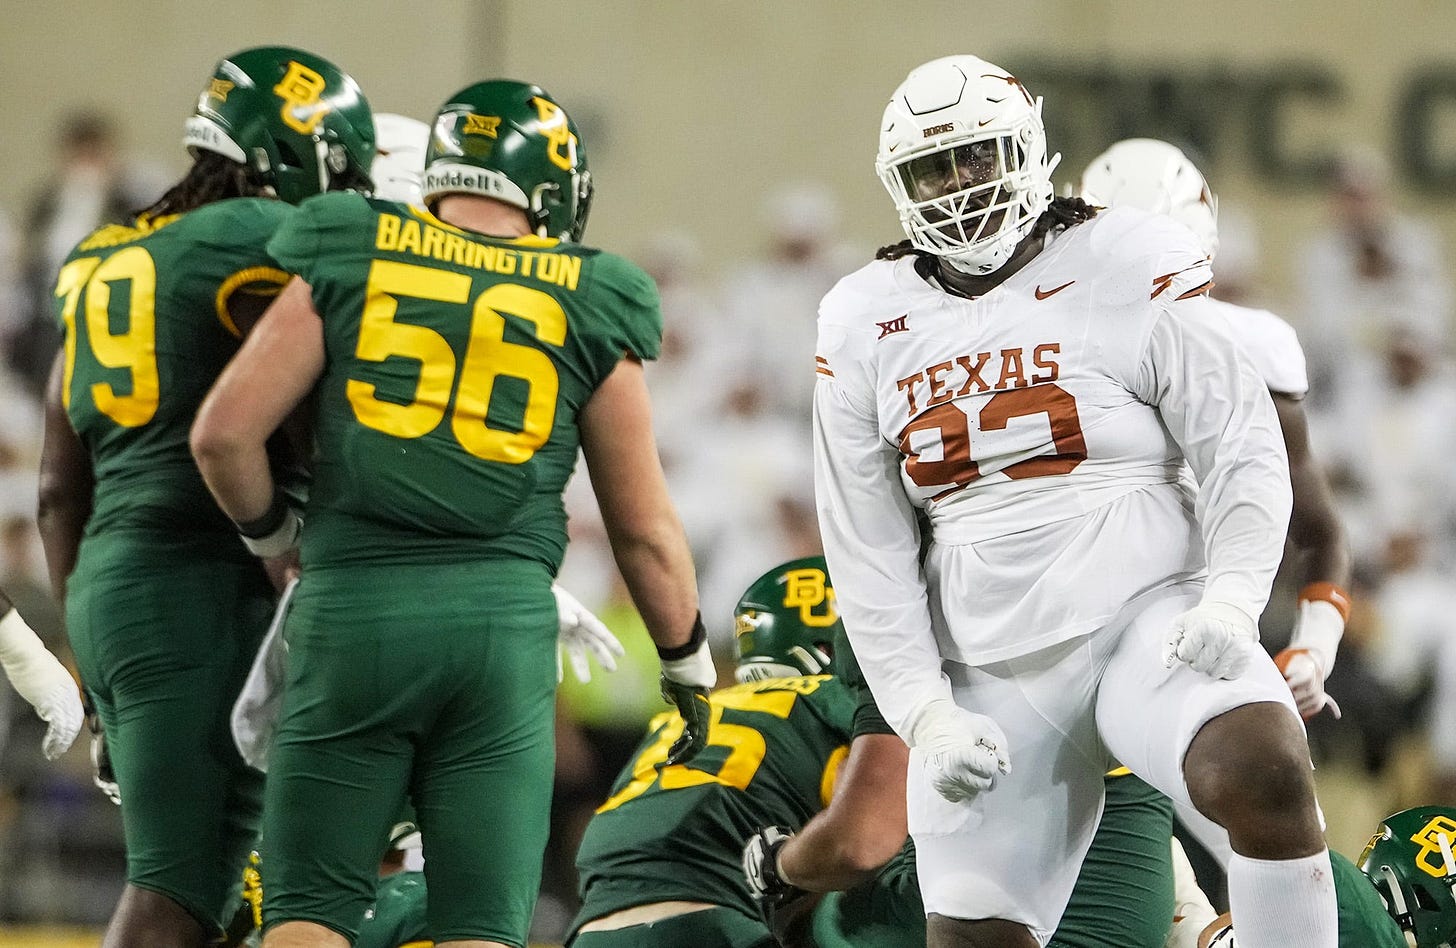 Texas football takes care of business, flexes its muscle in Waco